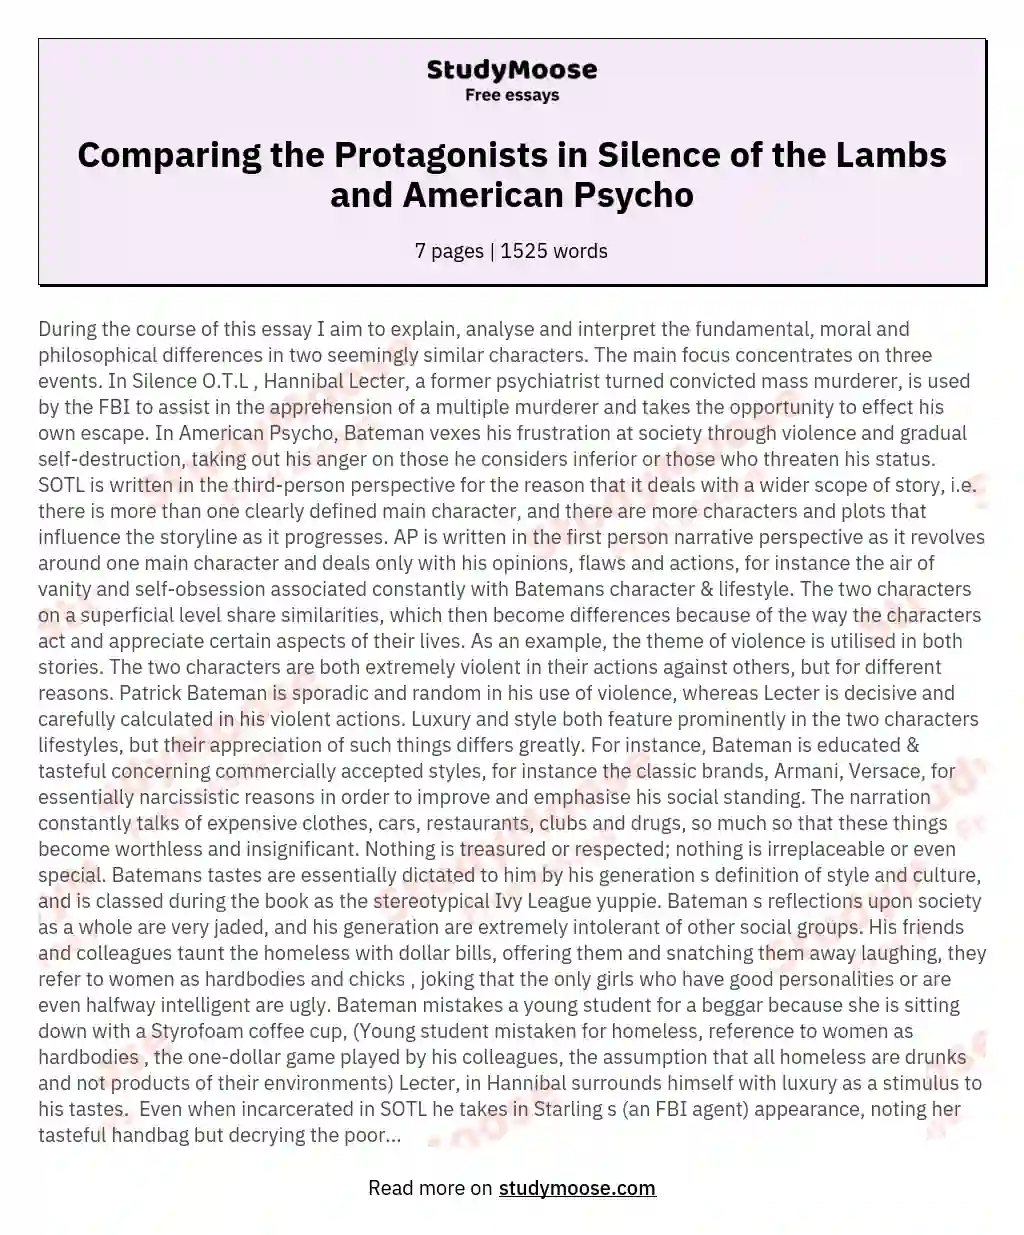 Comparing the Protagonists in Silence of the Lambs and American Psycho essay